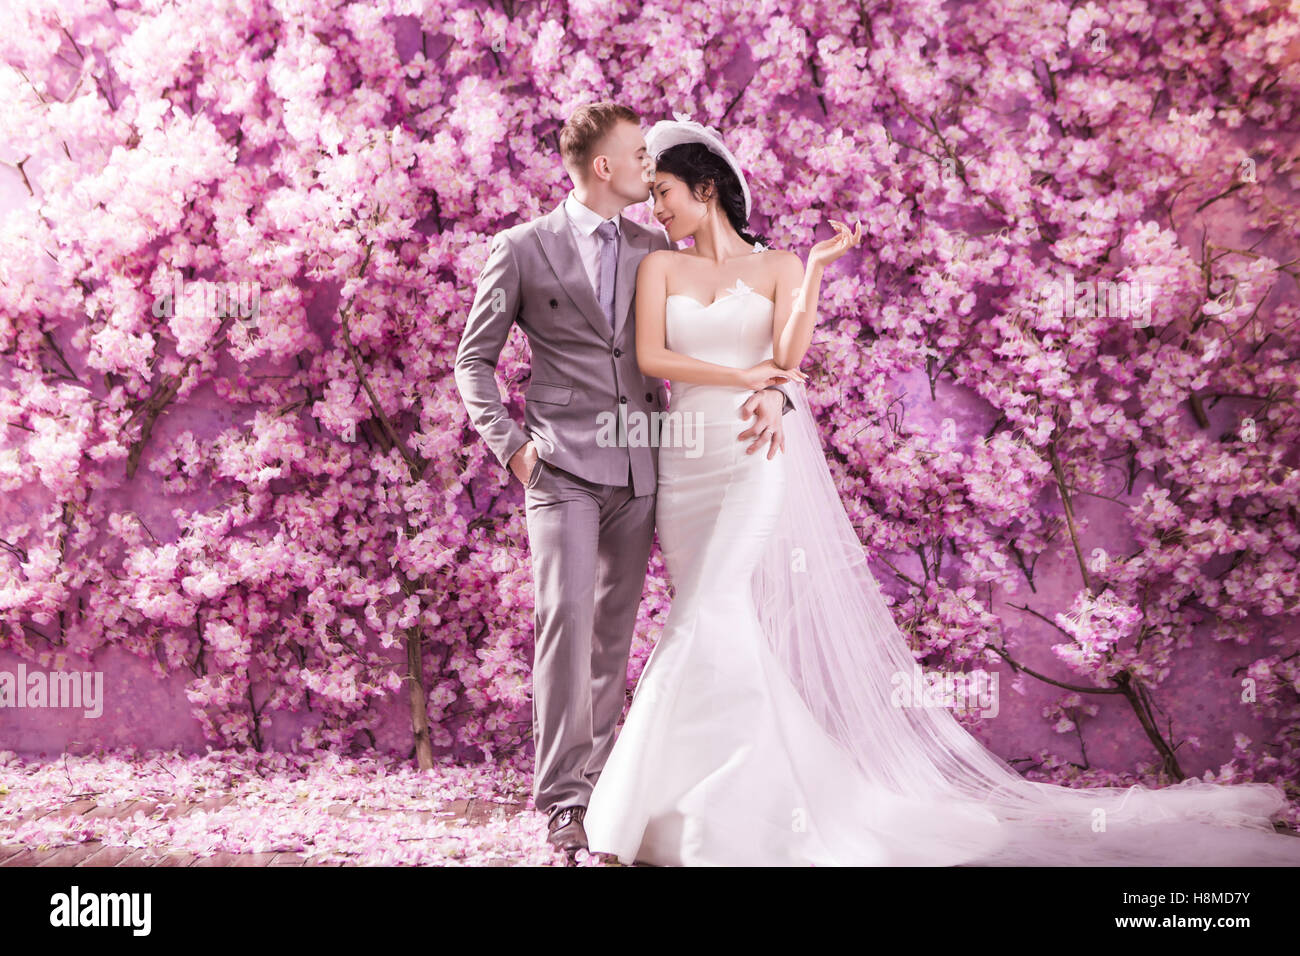 Romantic bridegroom kissing bride on forehead while standing against wall covered with pink flowers Stock Photo